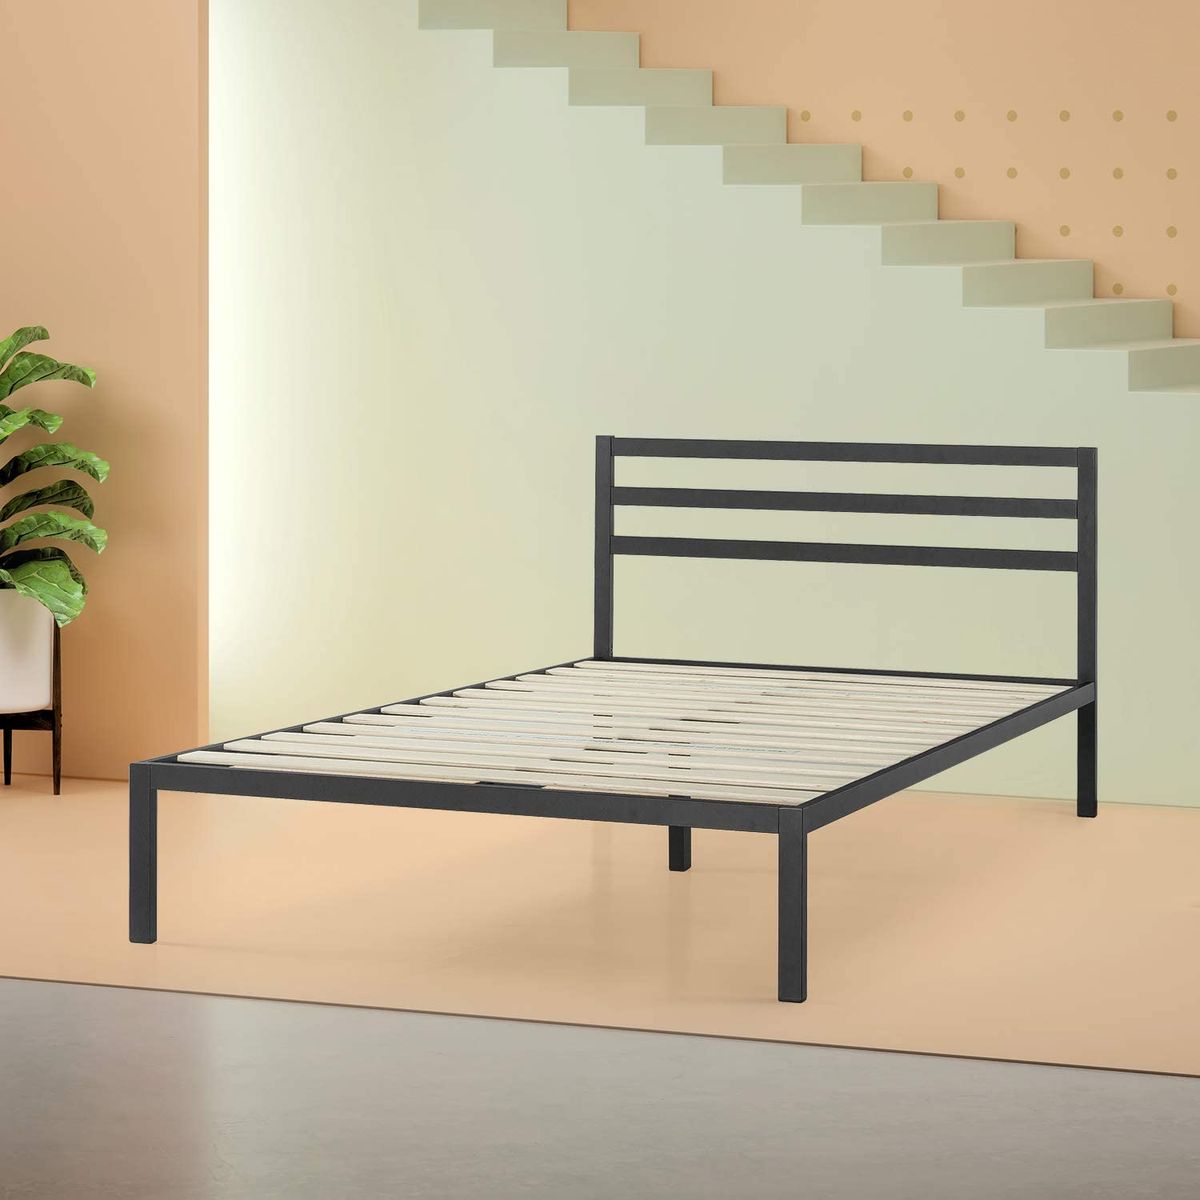 19 Best Metal Bed Frames 2020 The, How To Make A Metal Bed Frame